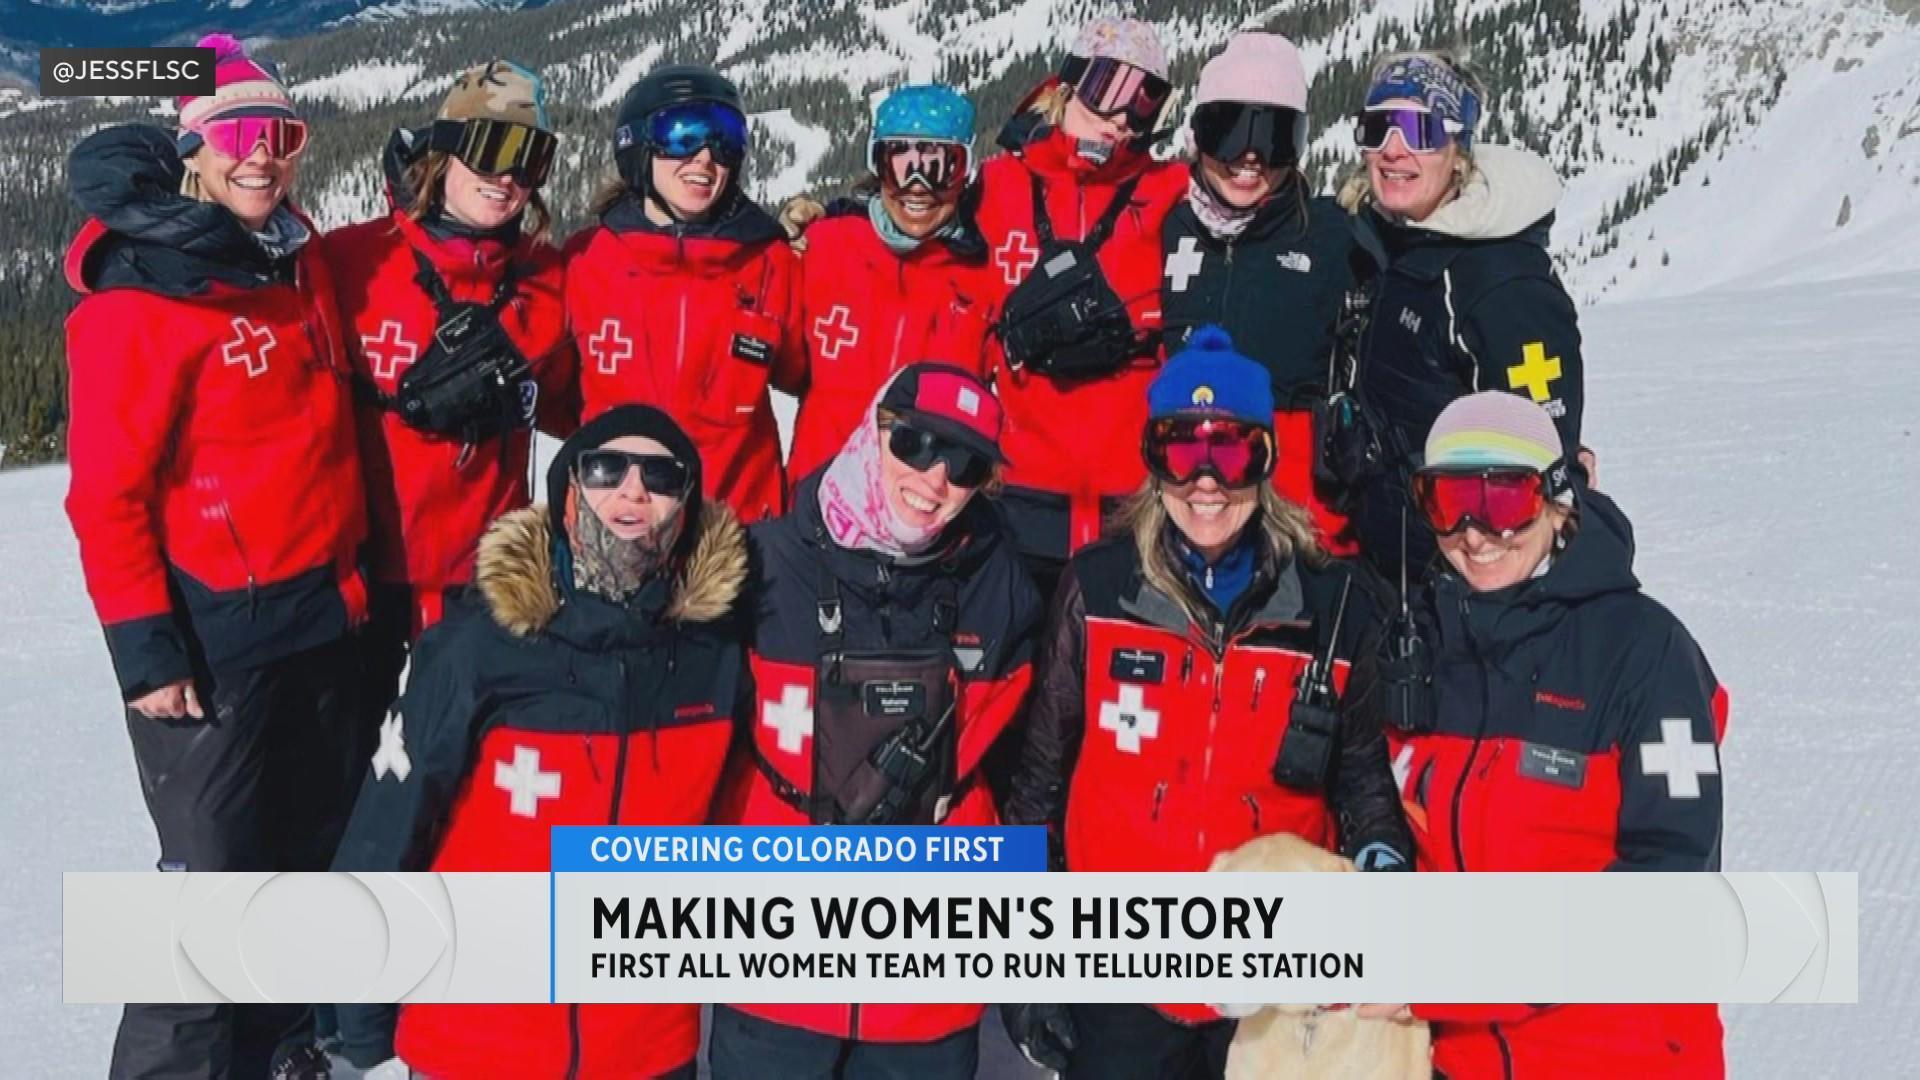 A Surge of Women in Ski Patrols, Once Nearly All Men - The New